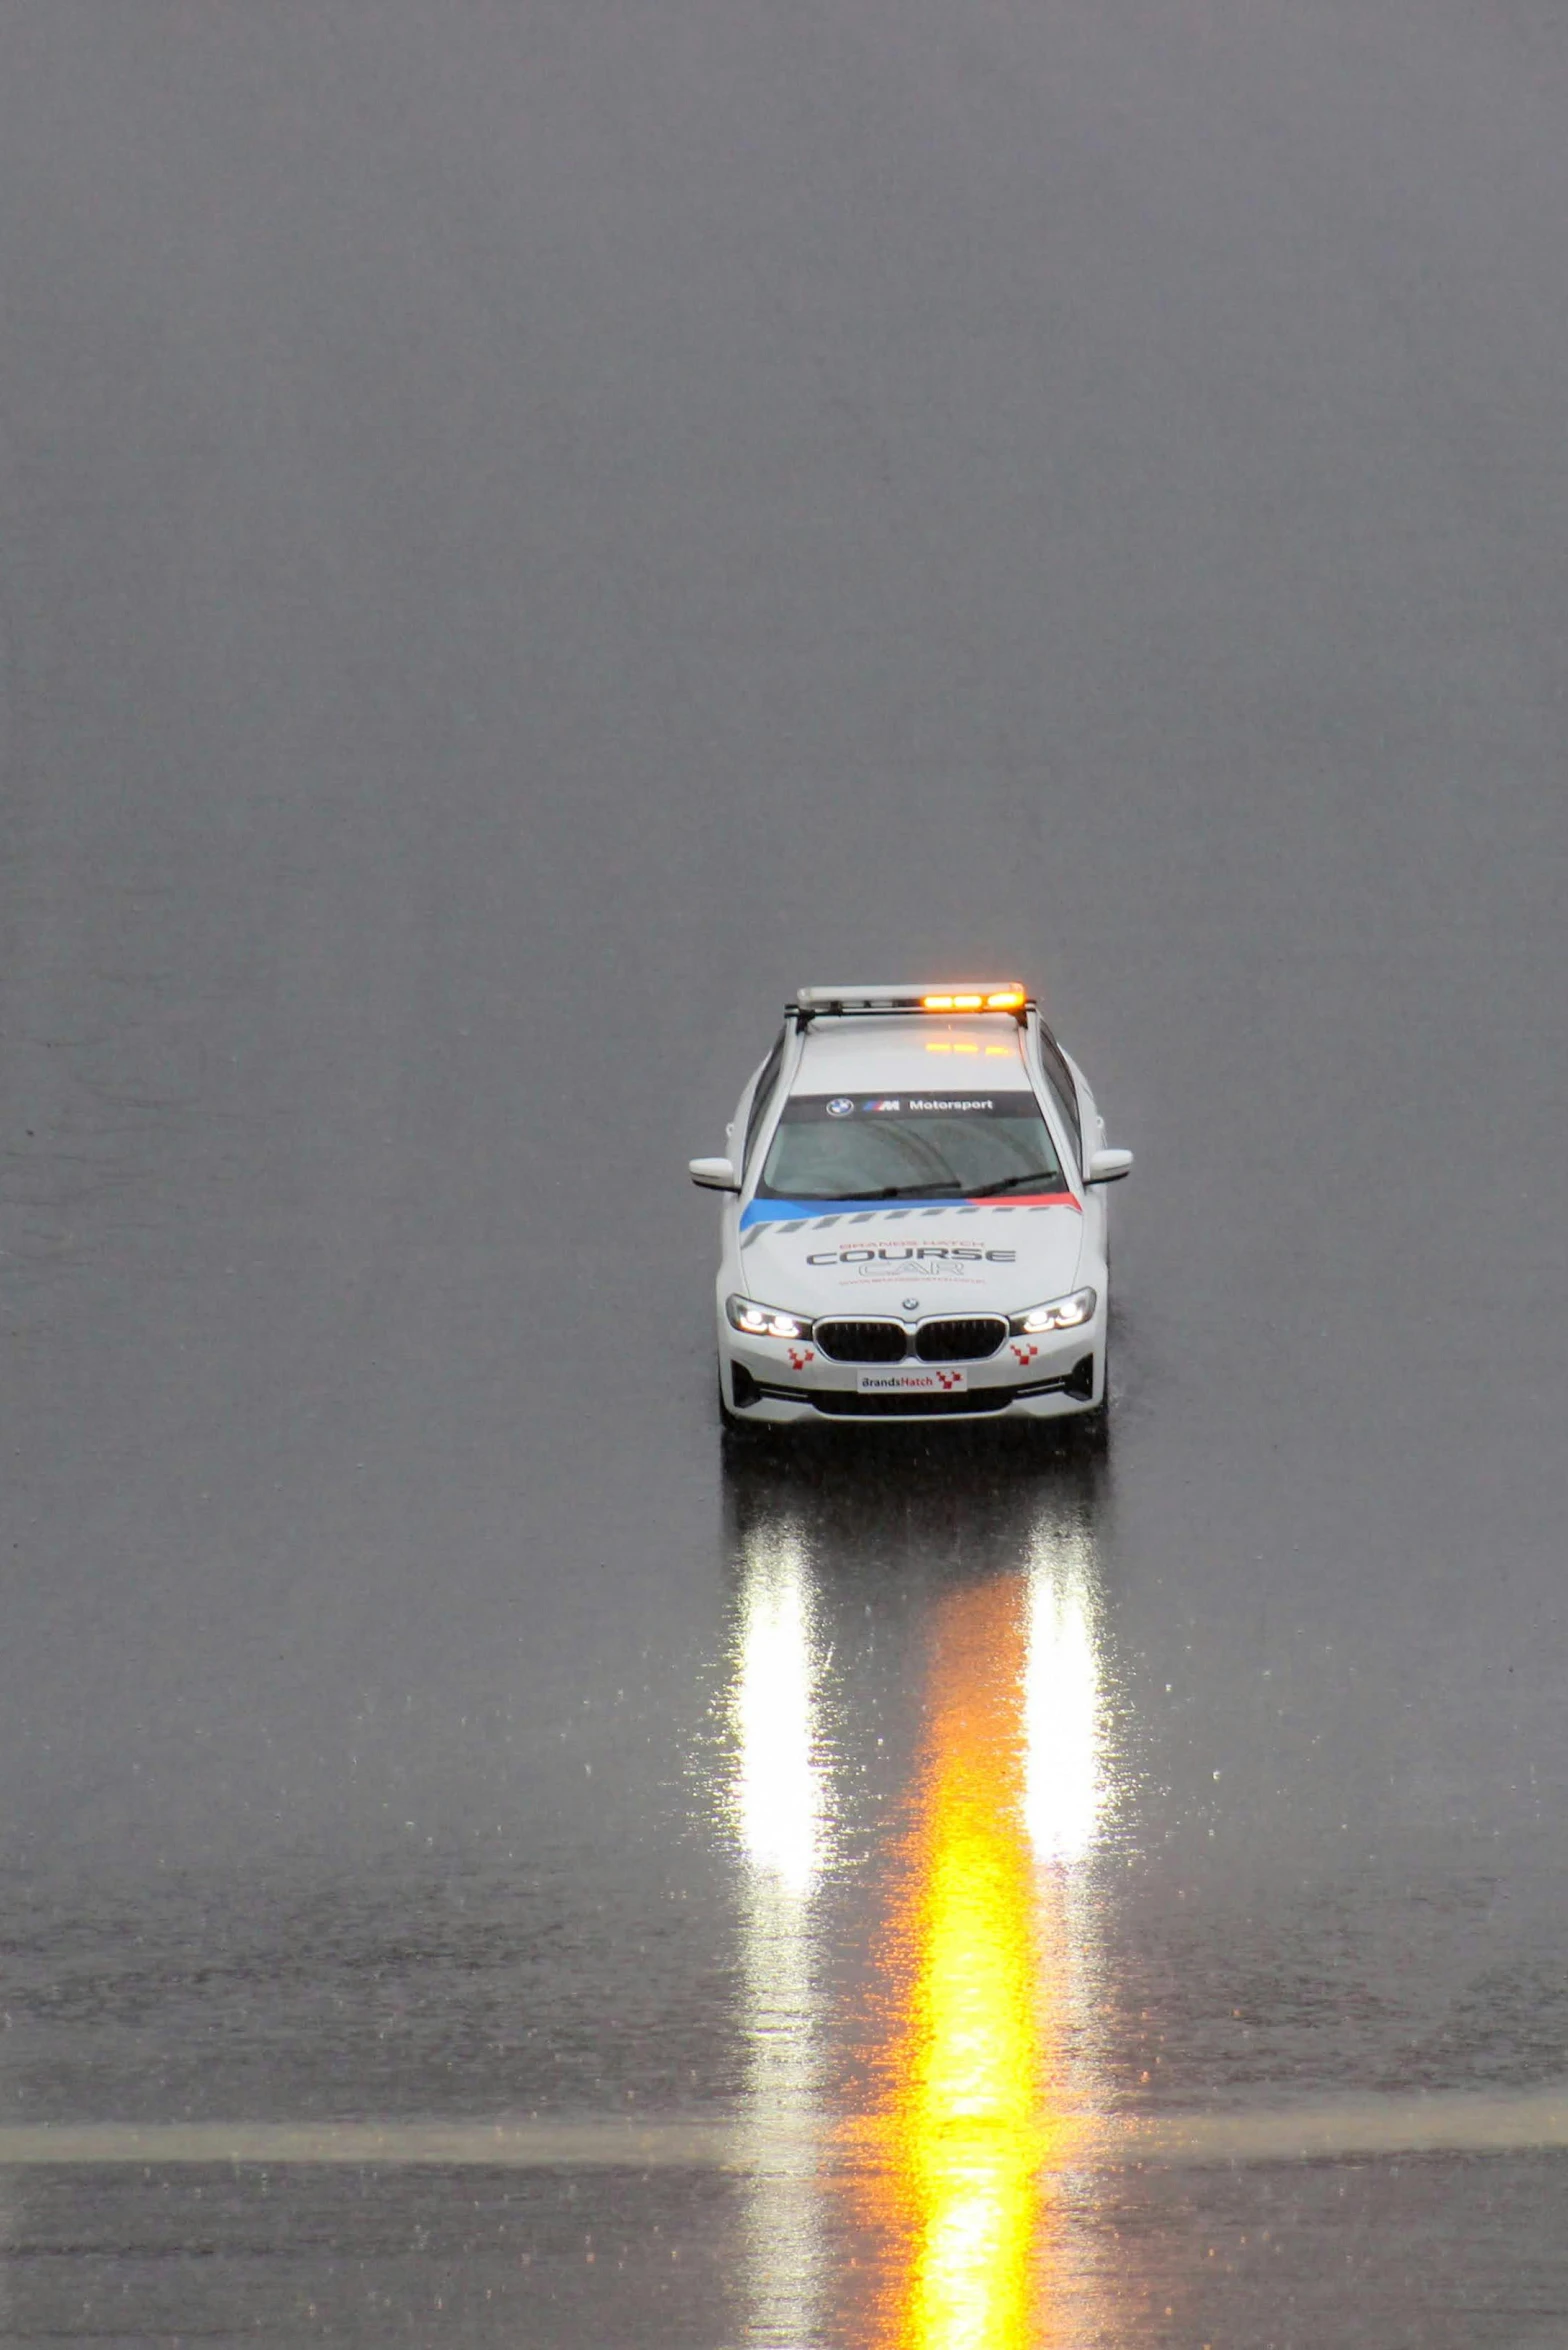 the police car is traveling through the rain